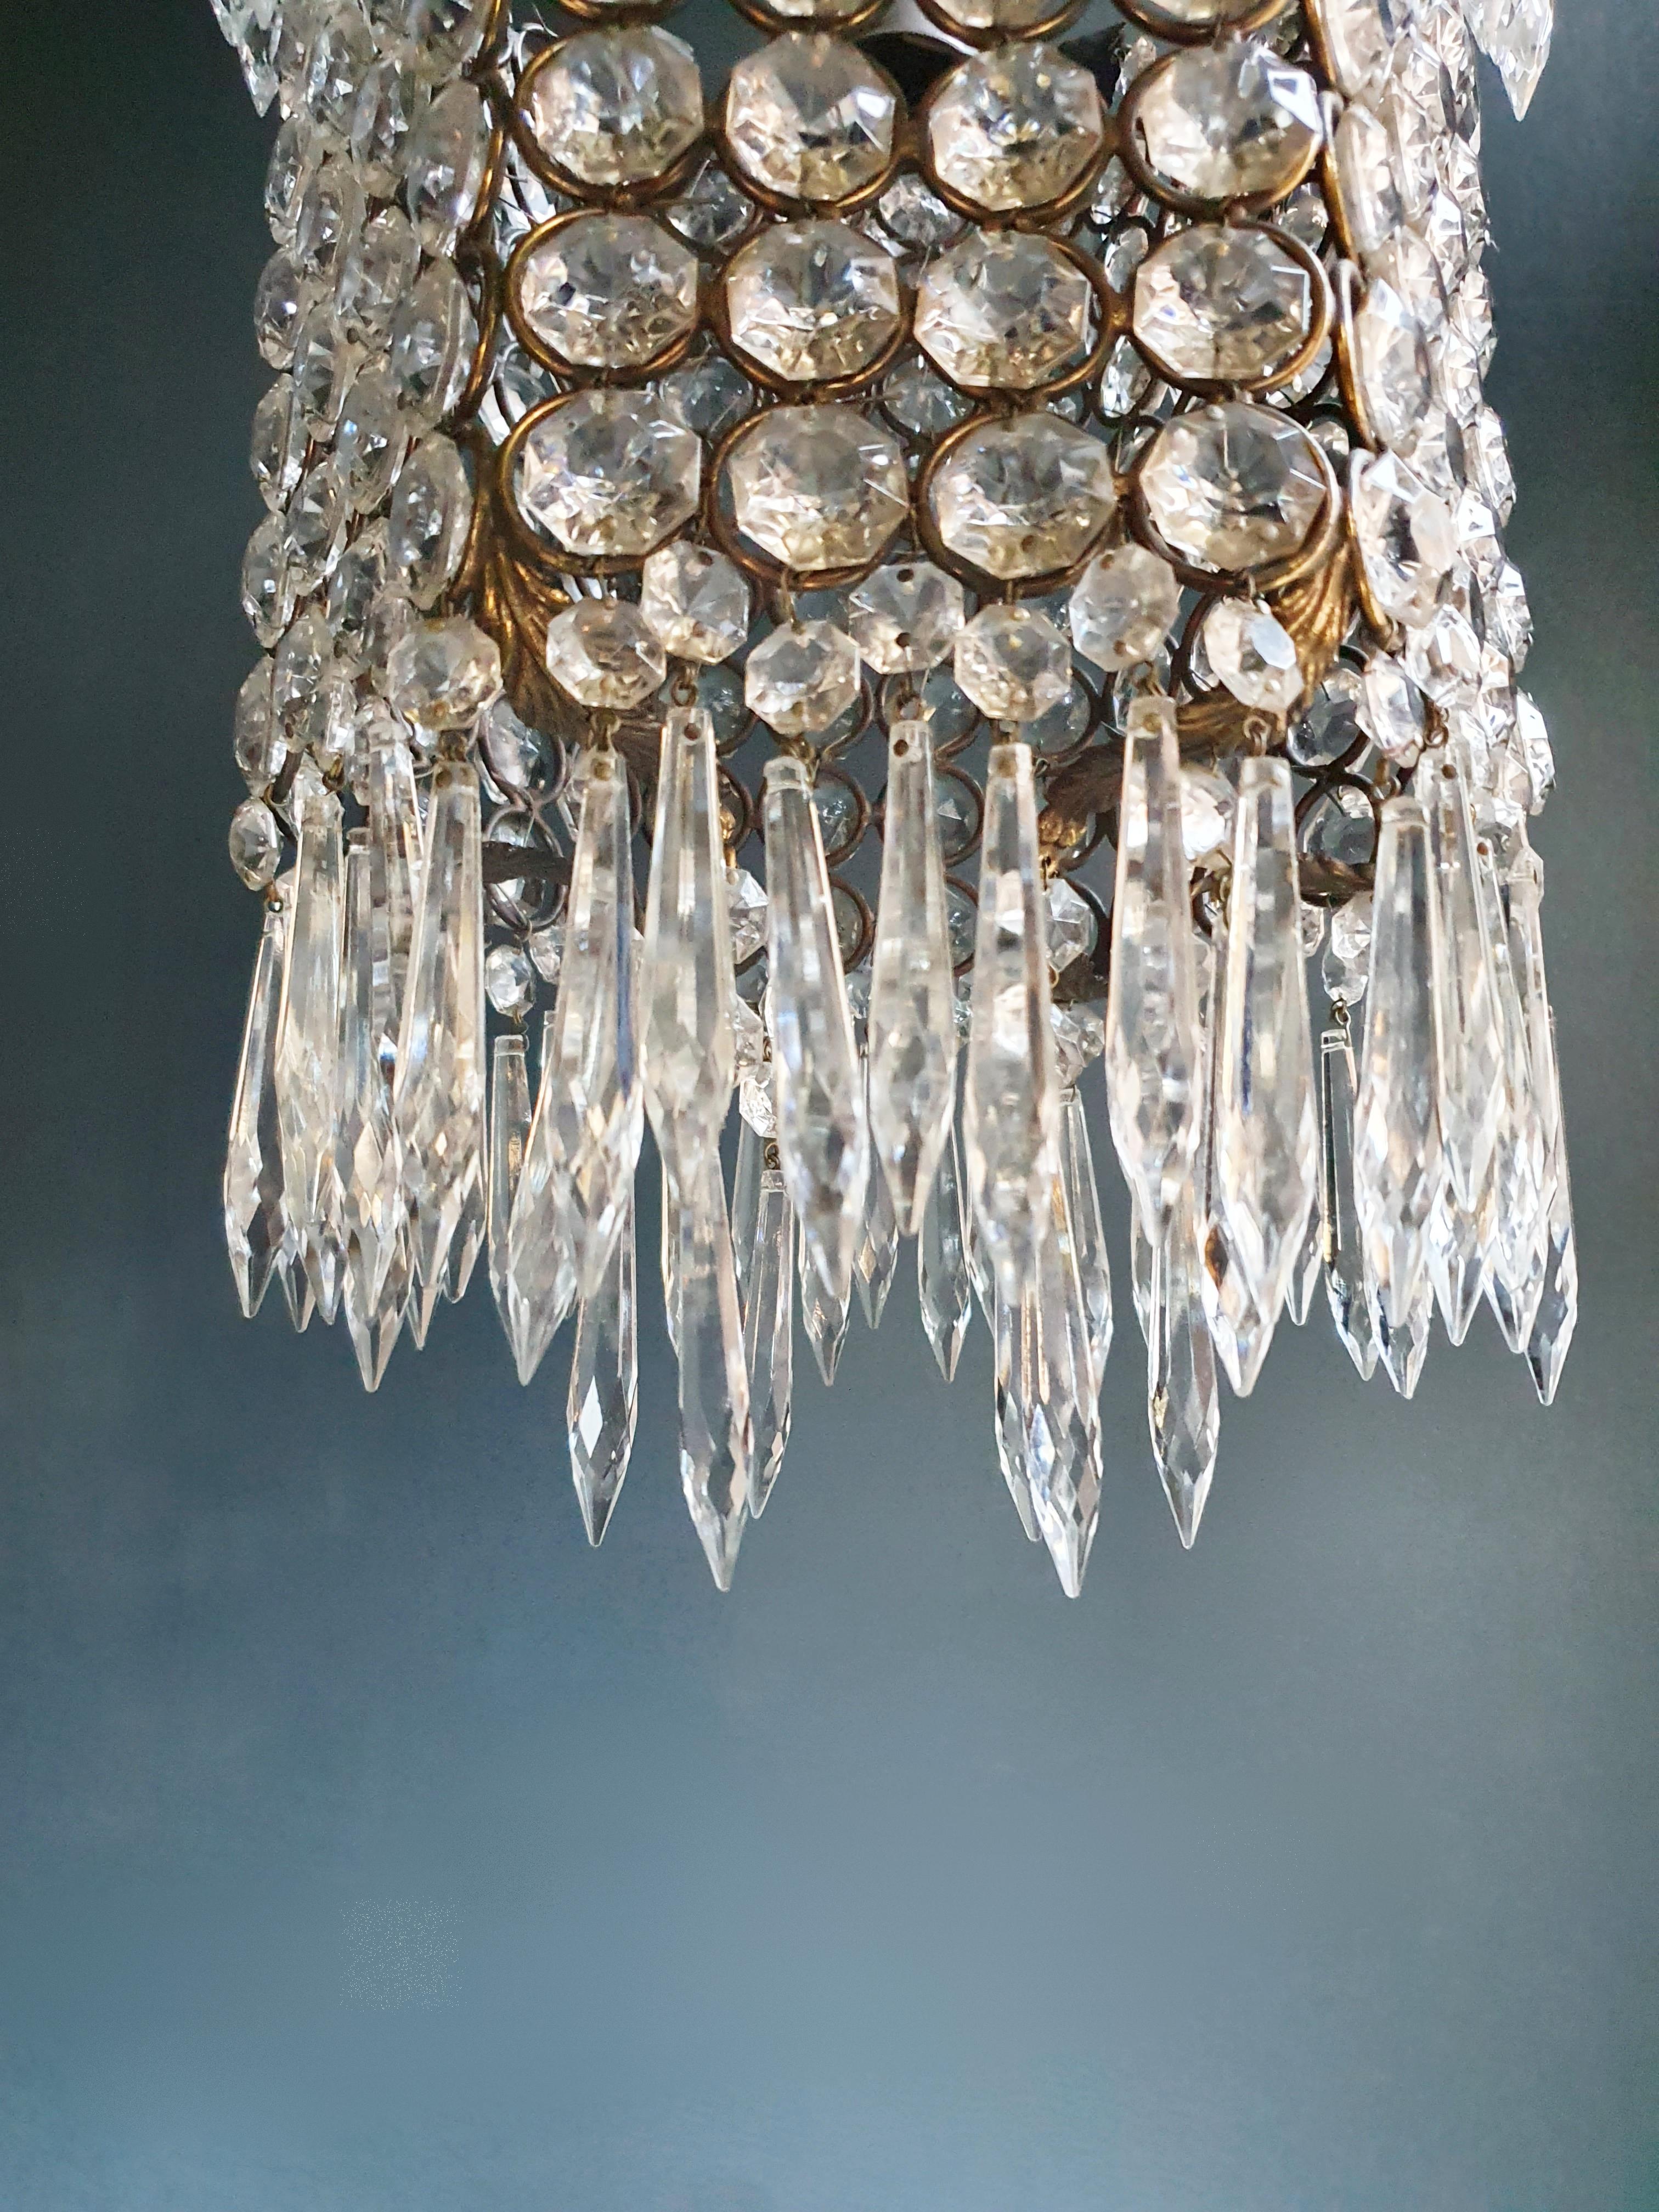 Mid-20th Century Fine Brass Empire Sac a Pearl Chandelier Crystal Lustre Ceiling Lamp Antique